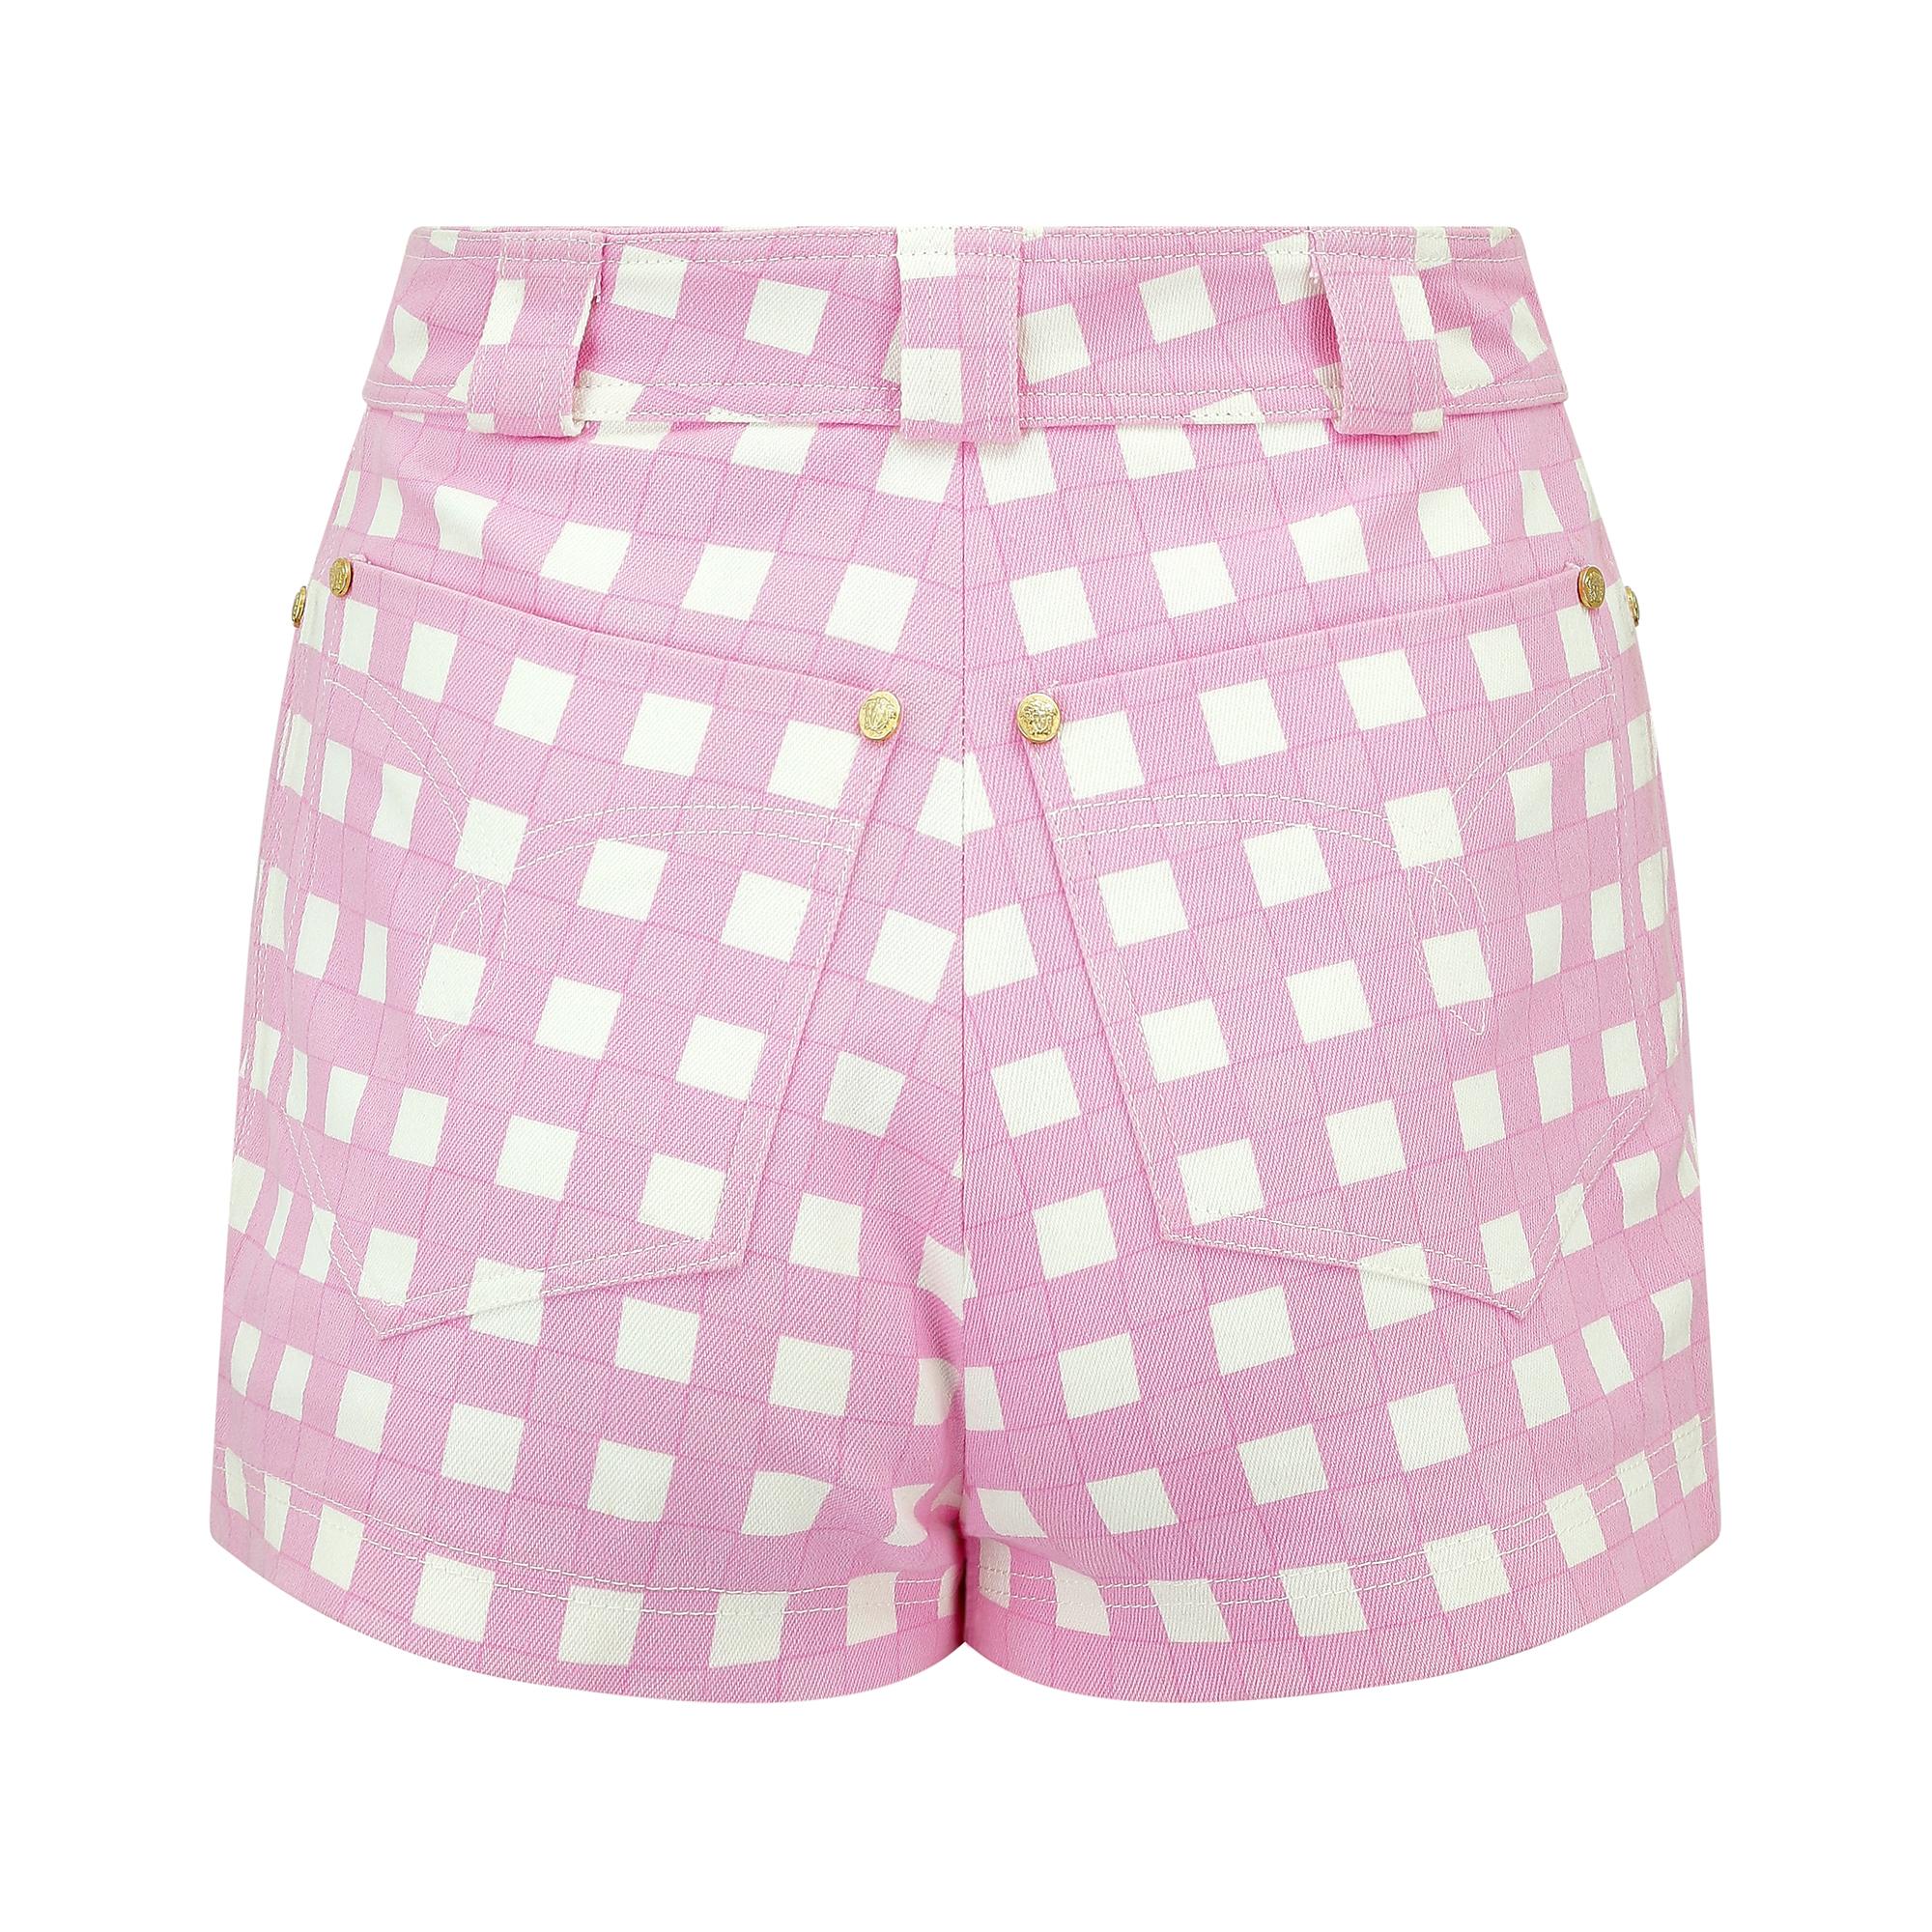 1993 Runway Gianni Versace Pink and White Gingham Shorts In Excellent Condition For Sale In London, GB